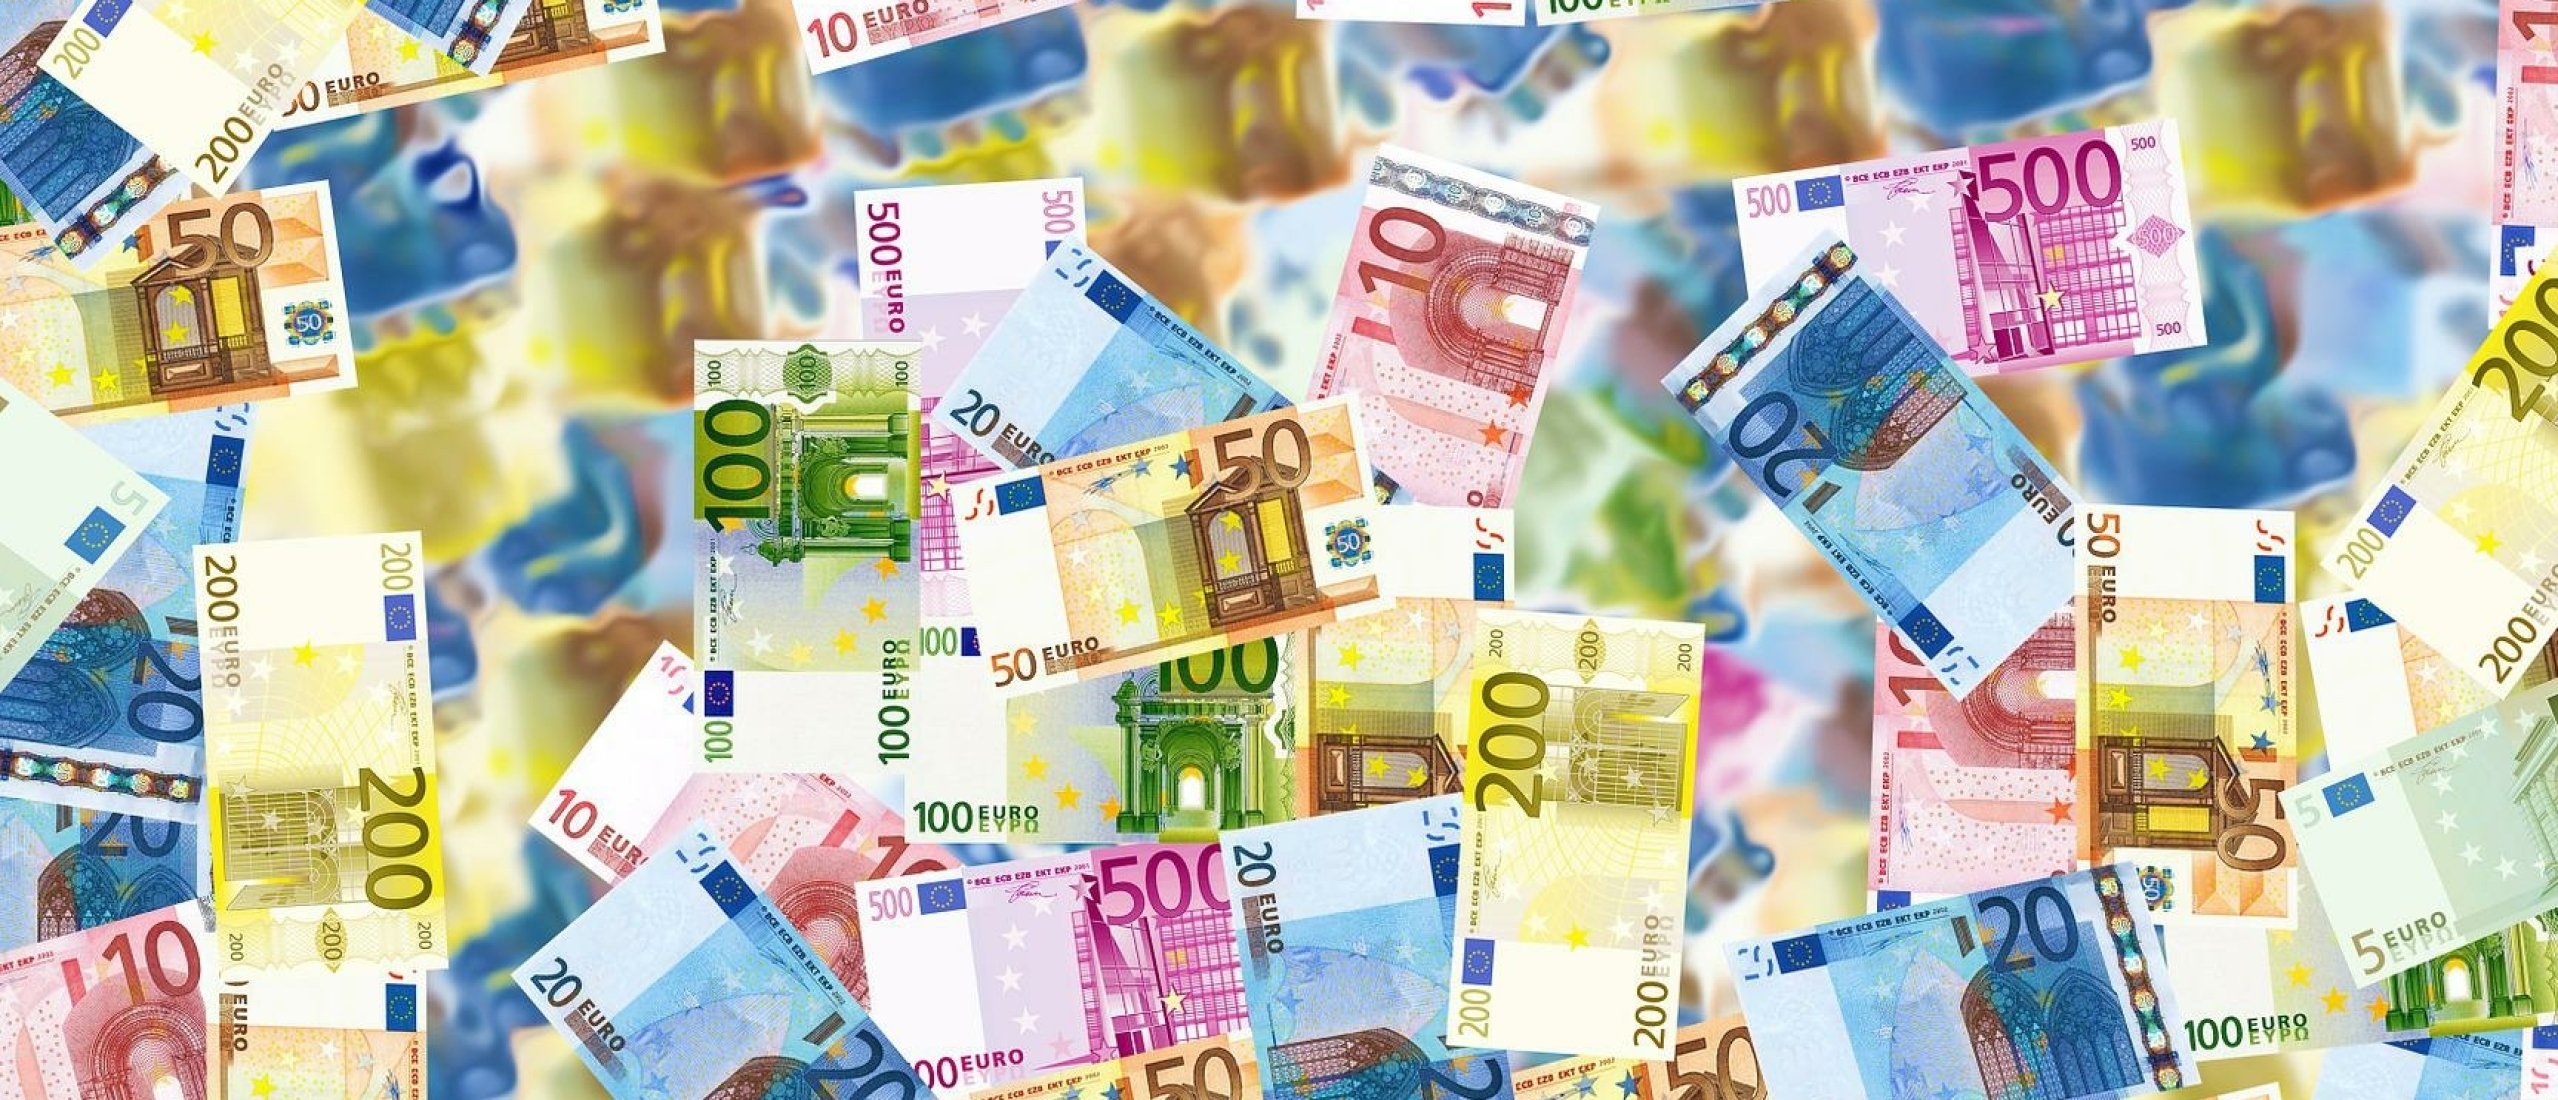 7 things about Dutch money